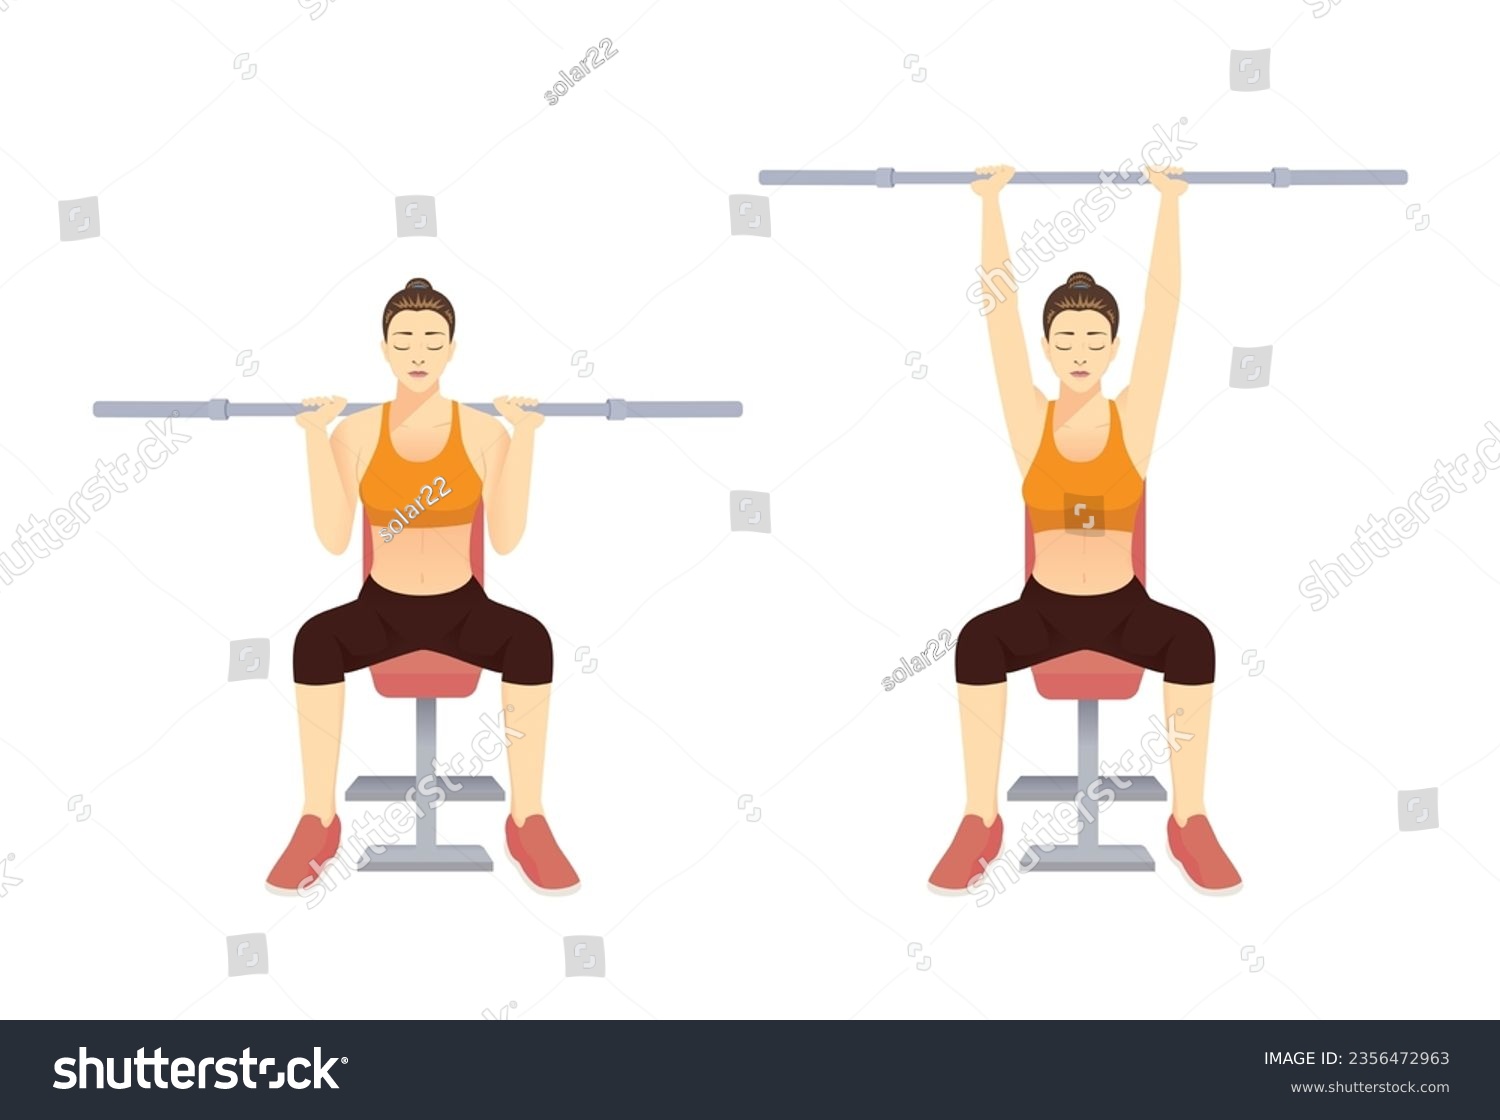 SVG of Sport woman doing workout with empty Barbell in Barbell shoulder press pose on bench. llustration about exercise diagram for arm and chest and shoulder. svg